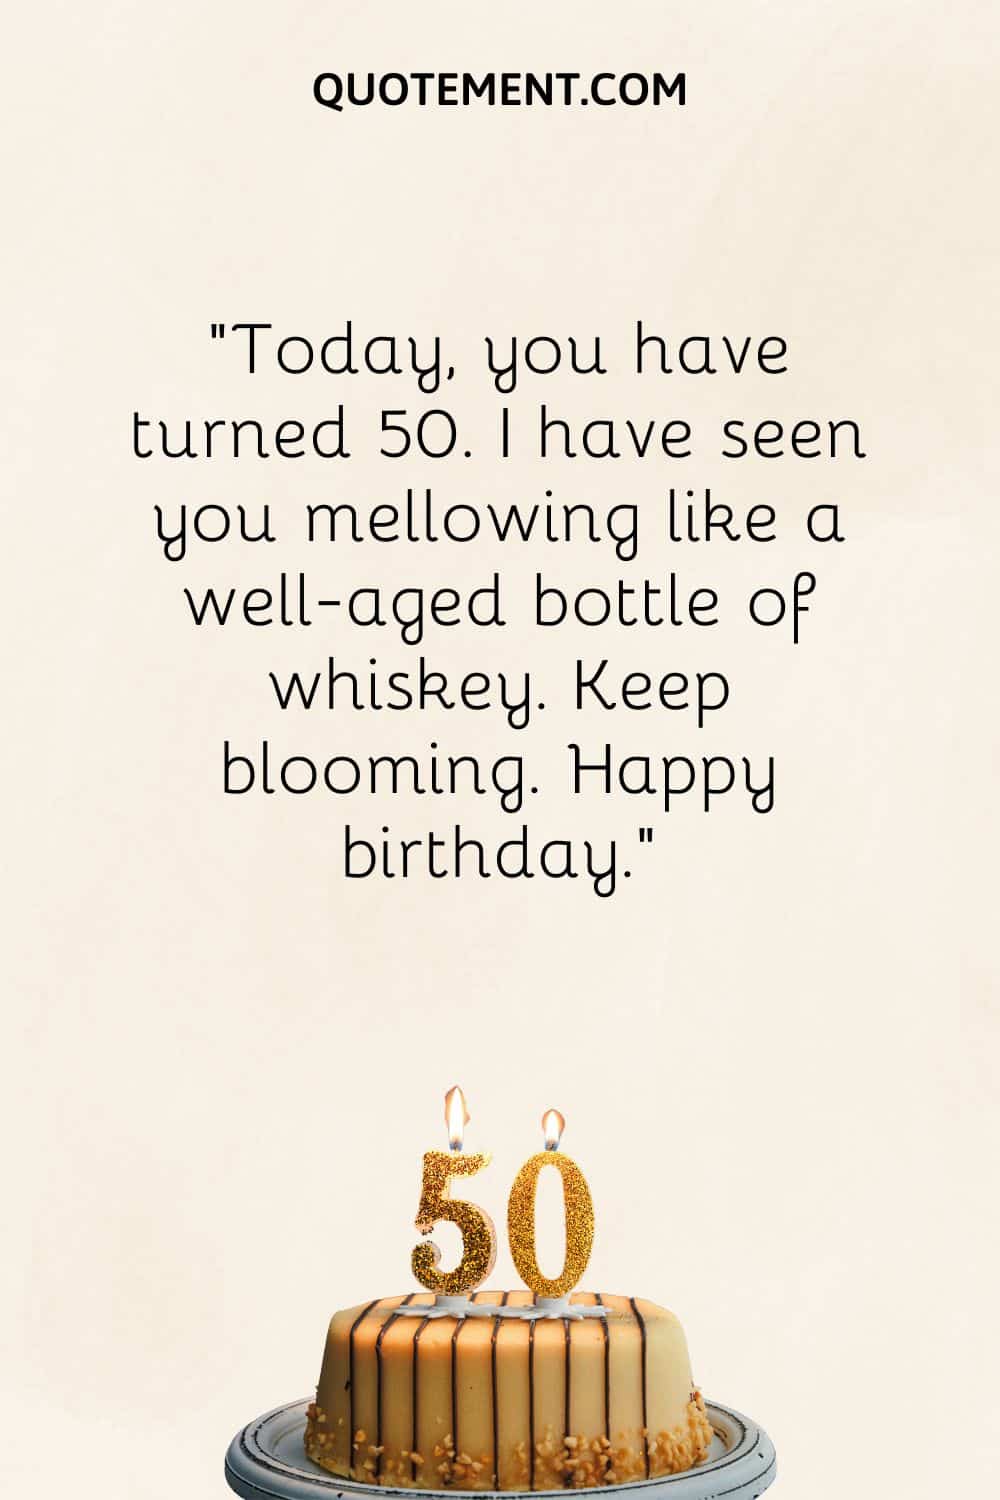 “Today, you have turned 50. I have seen you mellowing like a well-aged bottle of whiskey. Keep blooming. Happy birthday.”